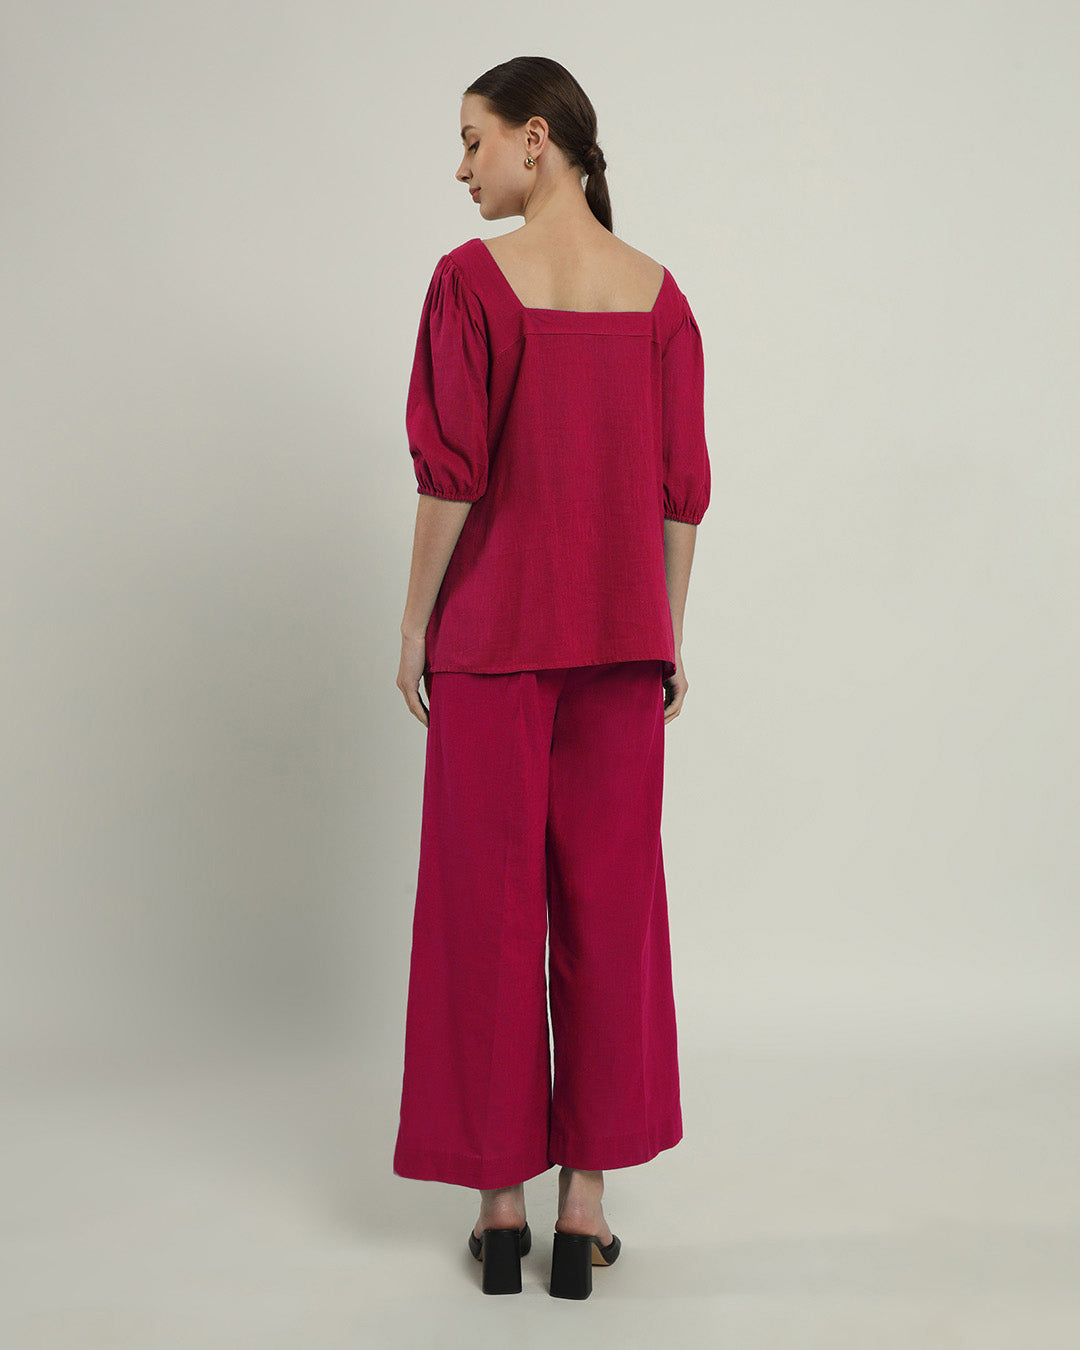 Berry Urbanite Square Neck Top (Without Bottoms)